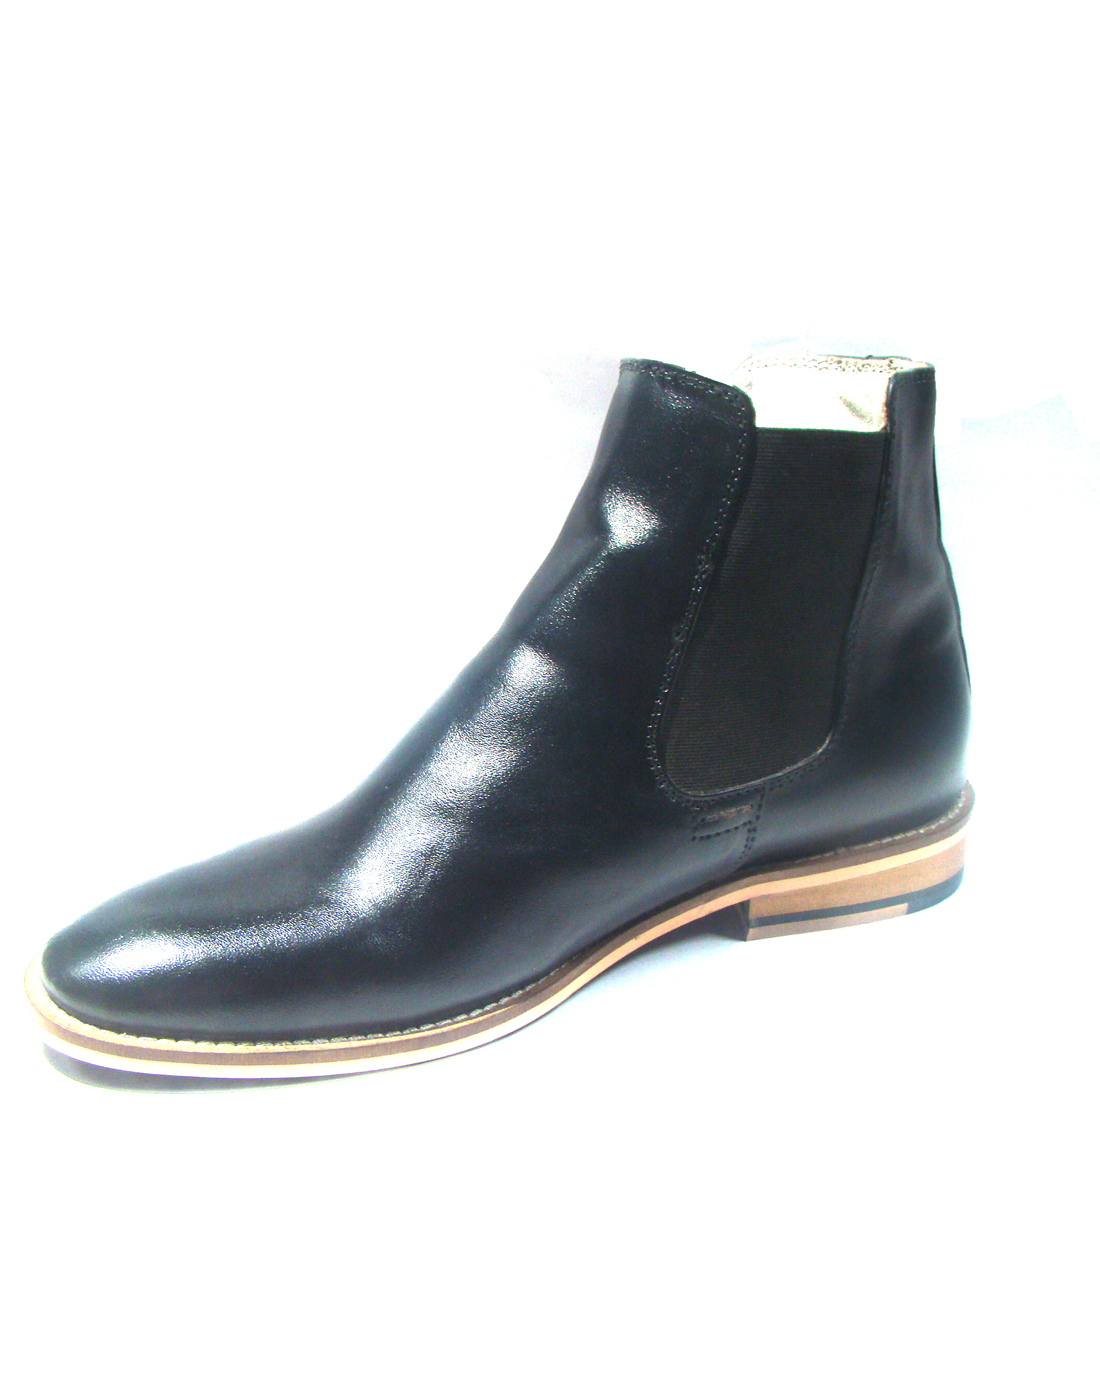 Chelsea Boots - Buy 6 inches Pure Leather Chelsea Boots online at ...